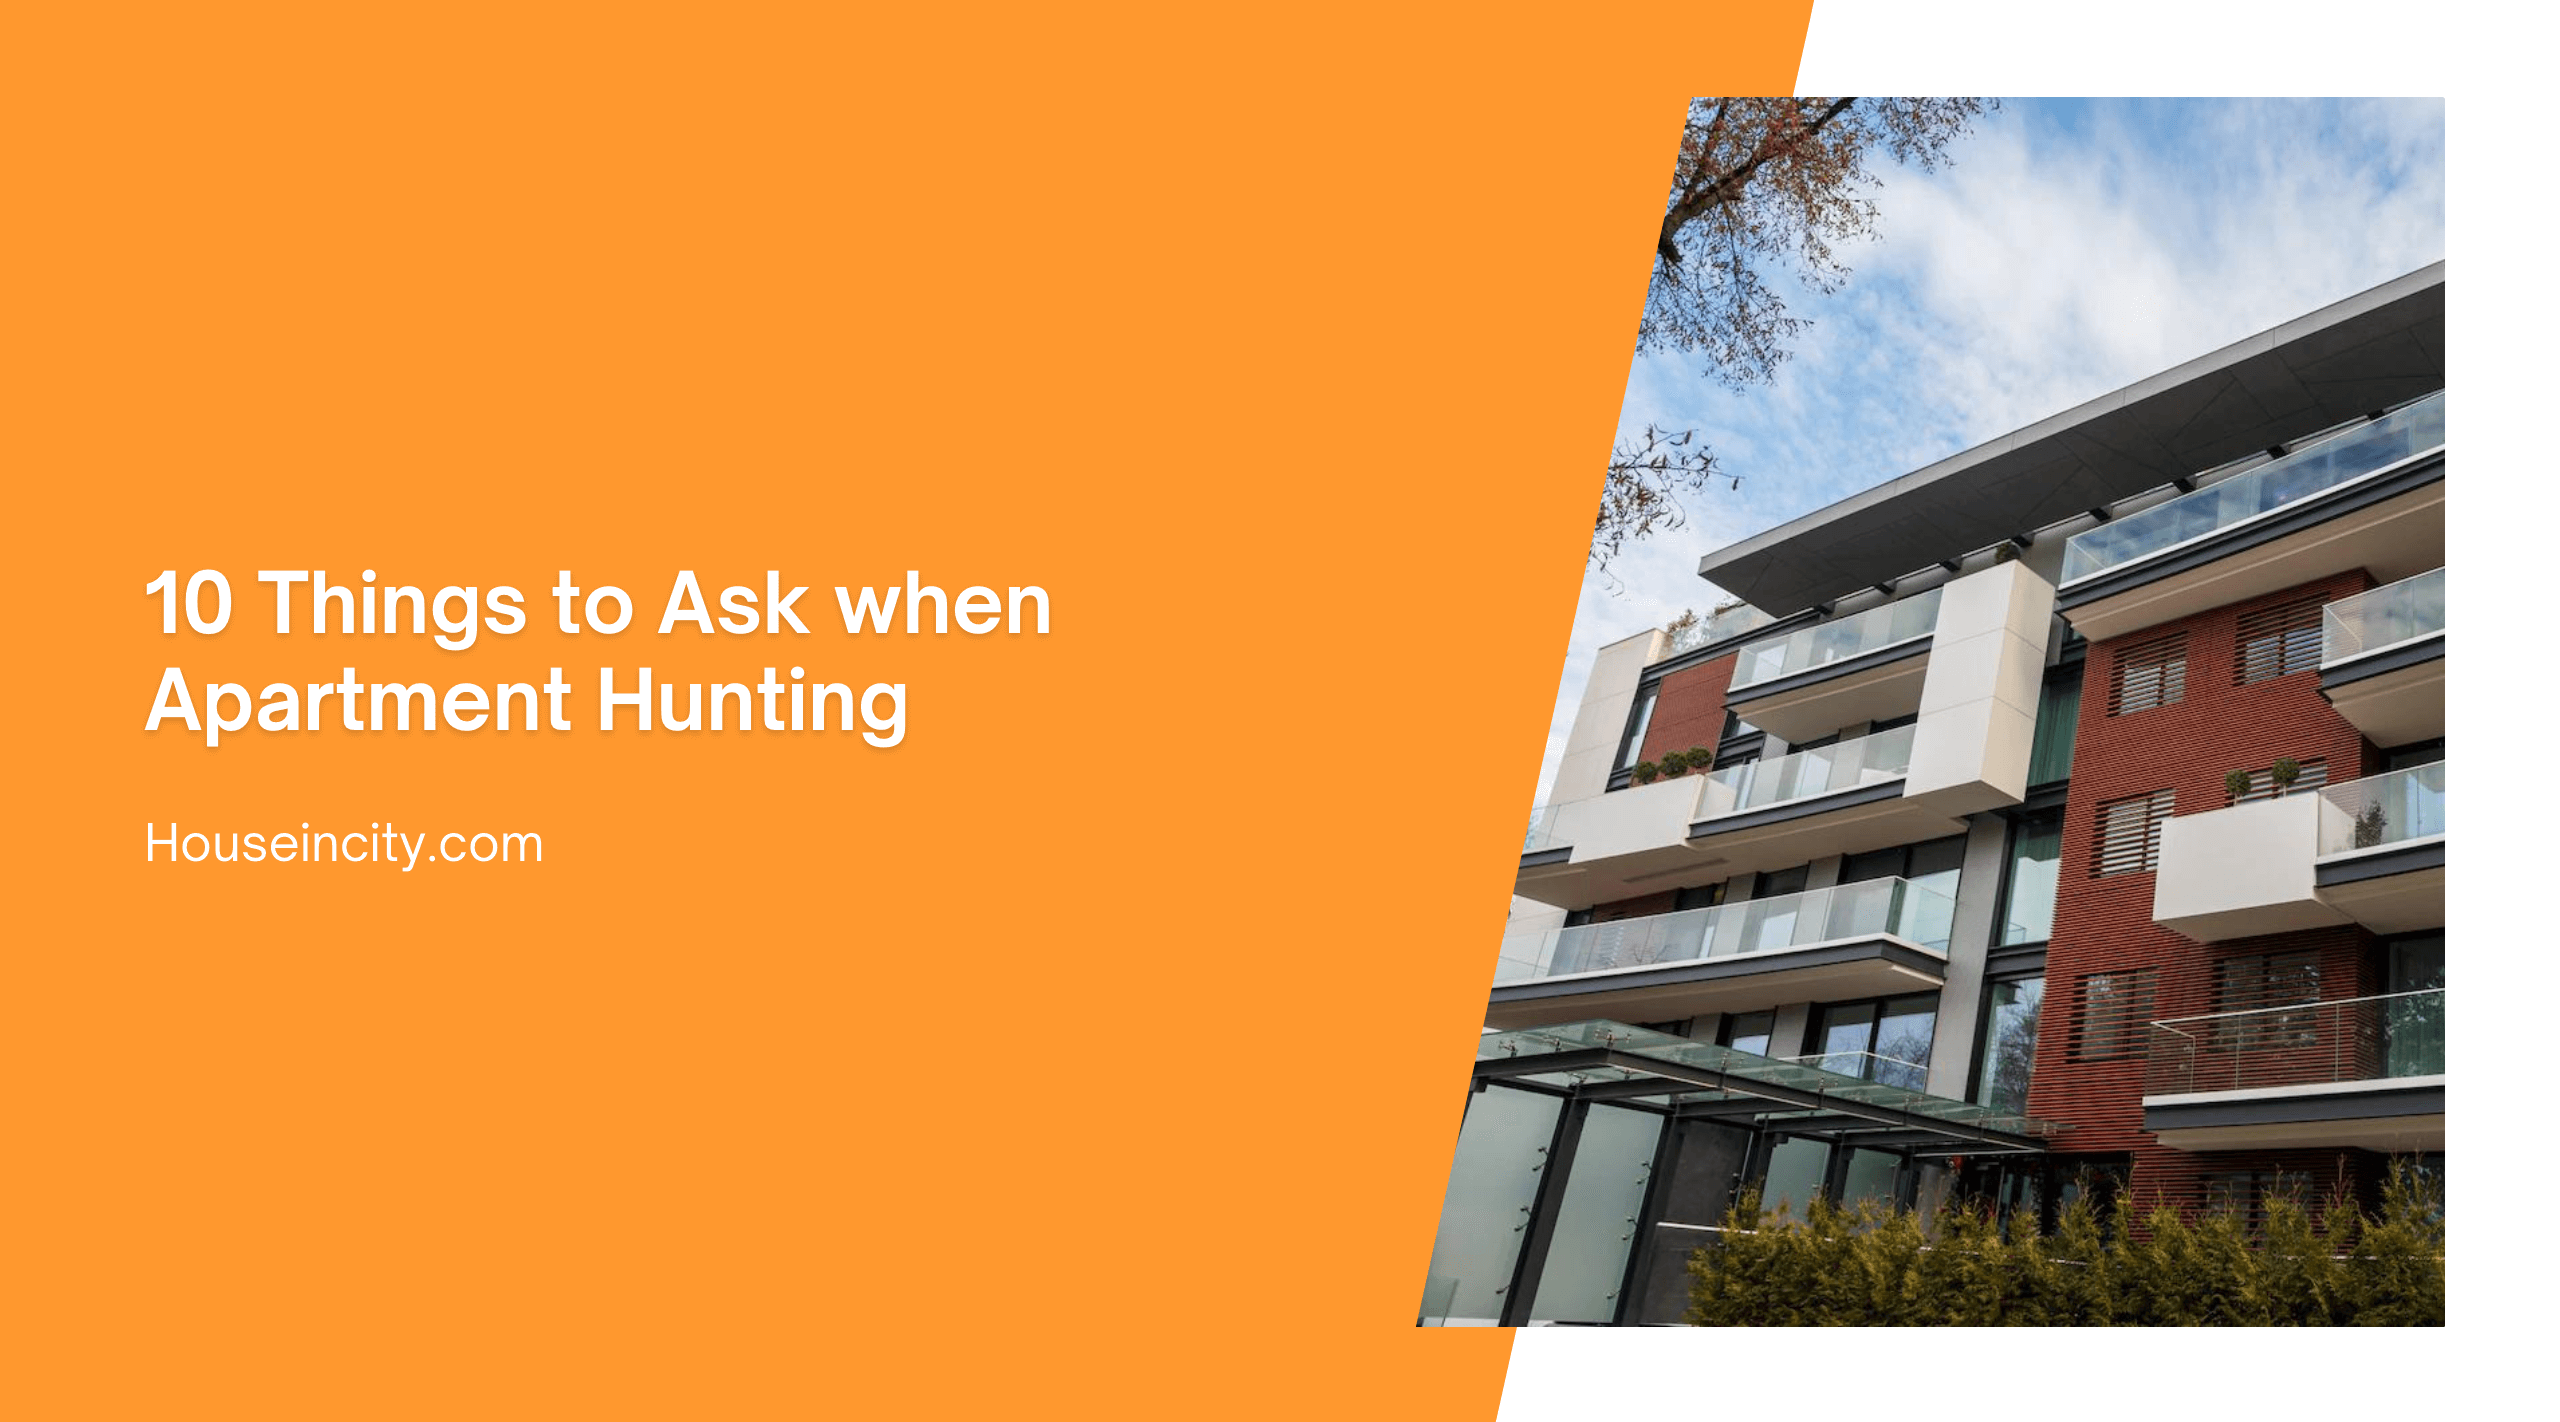 10 Things to Ask when Apartment Hunting